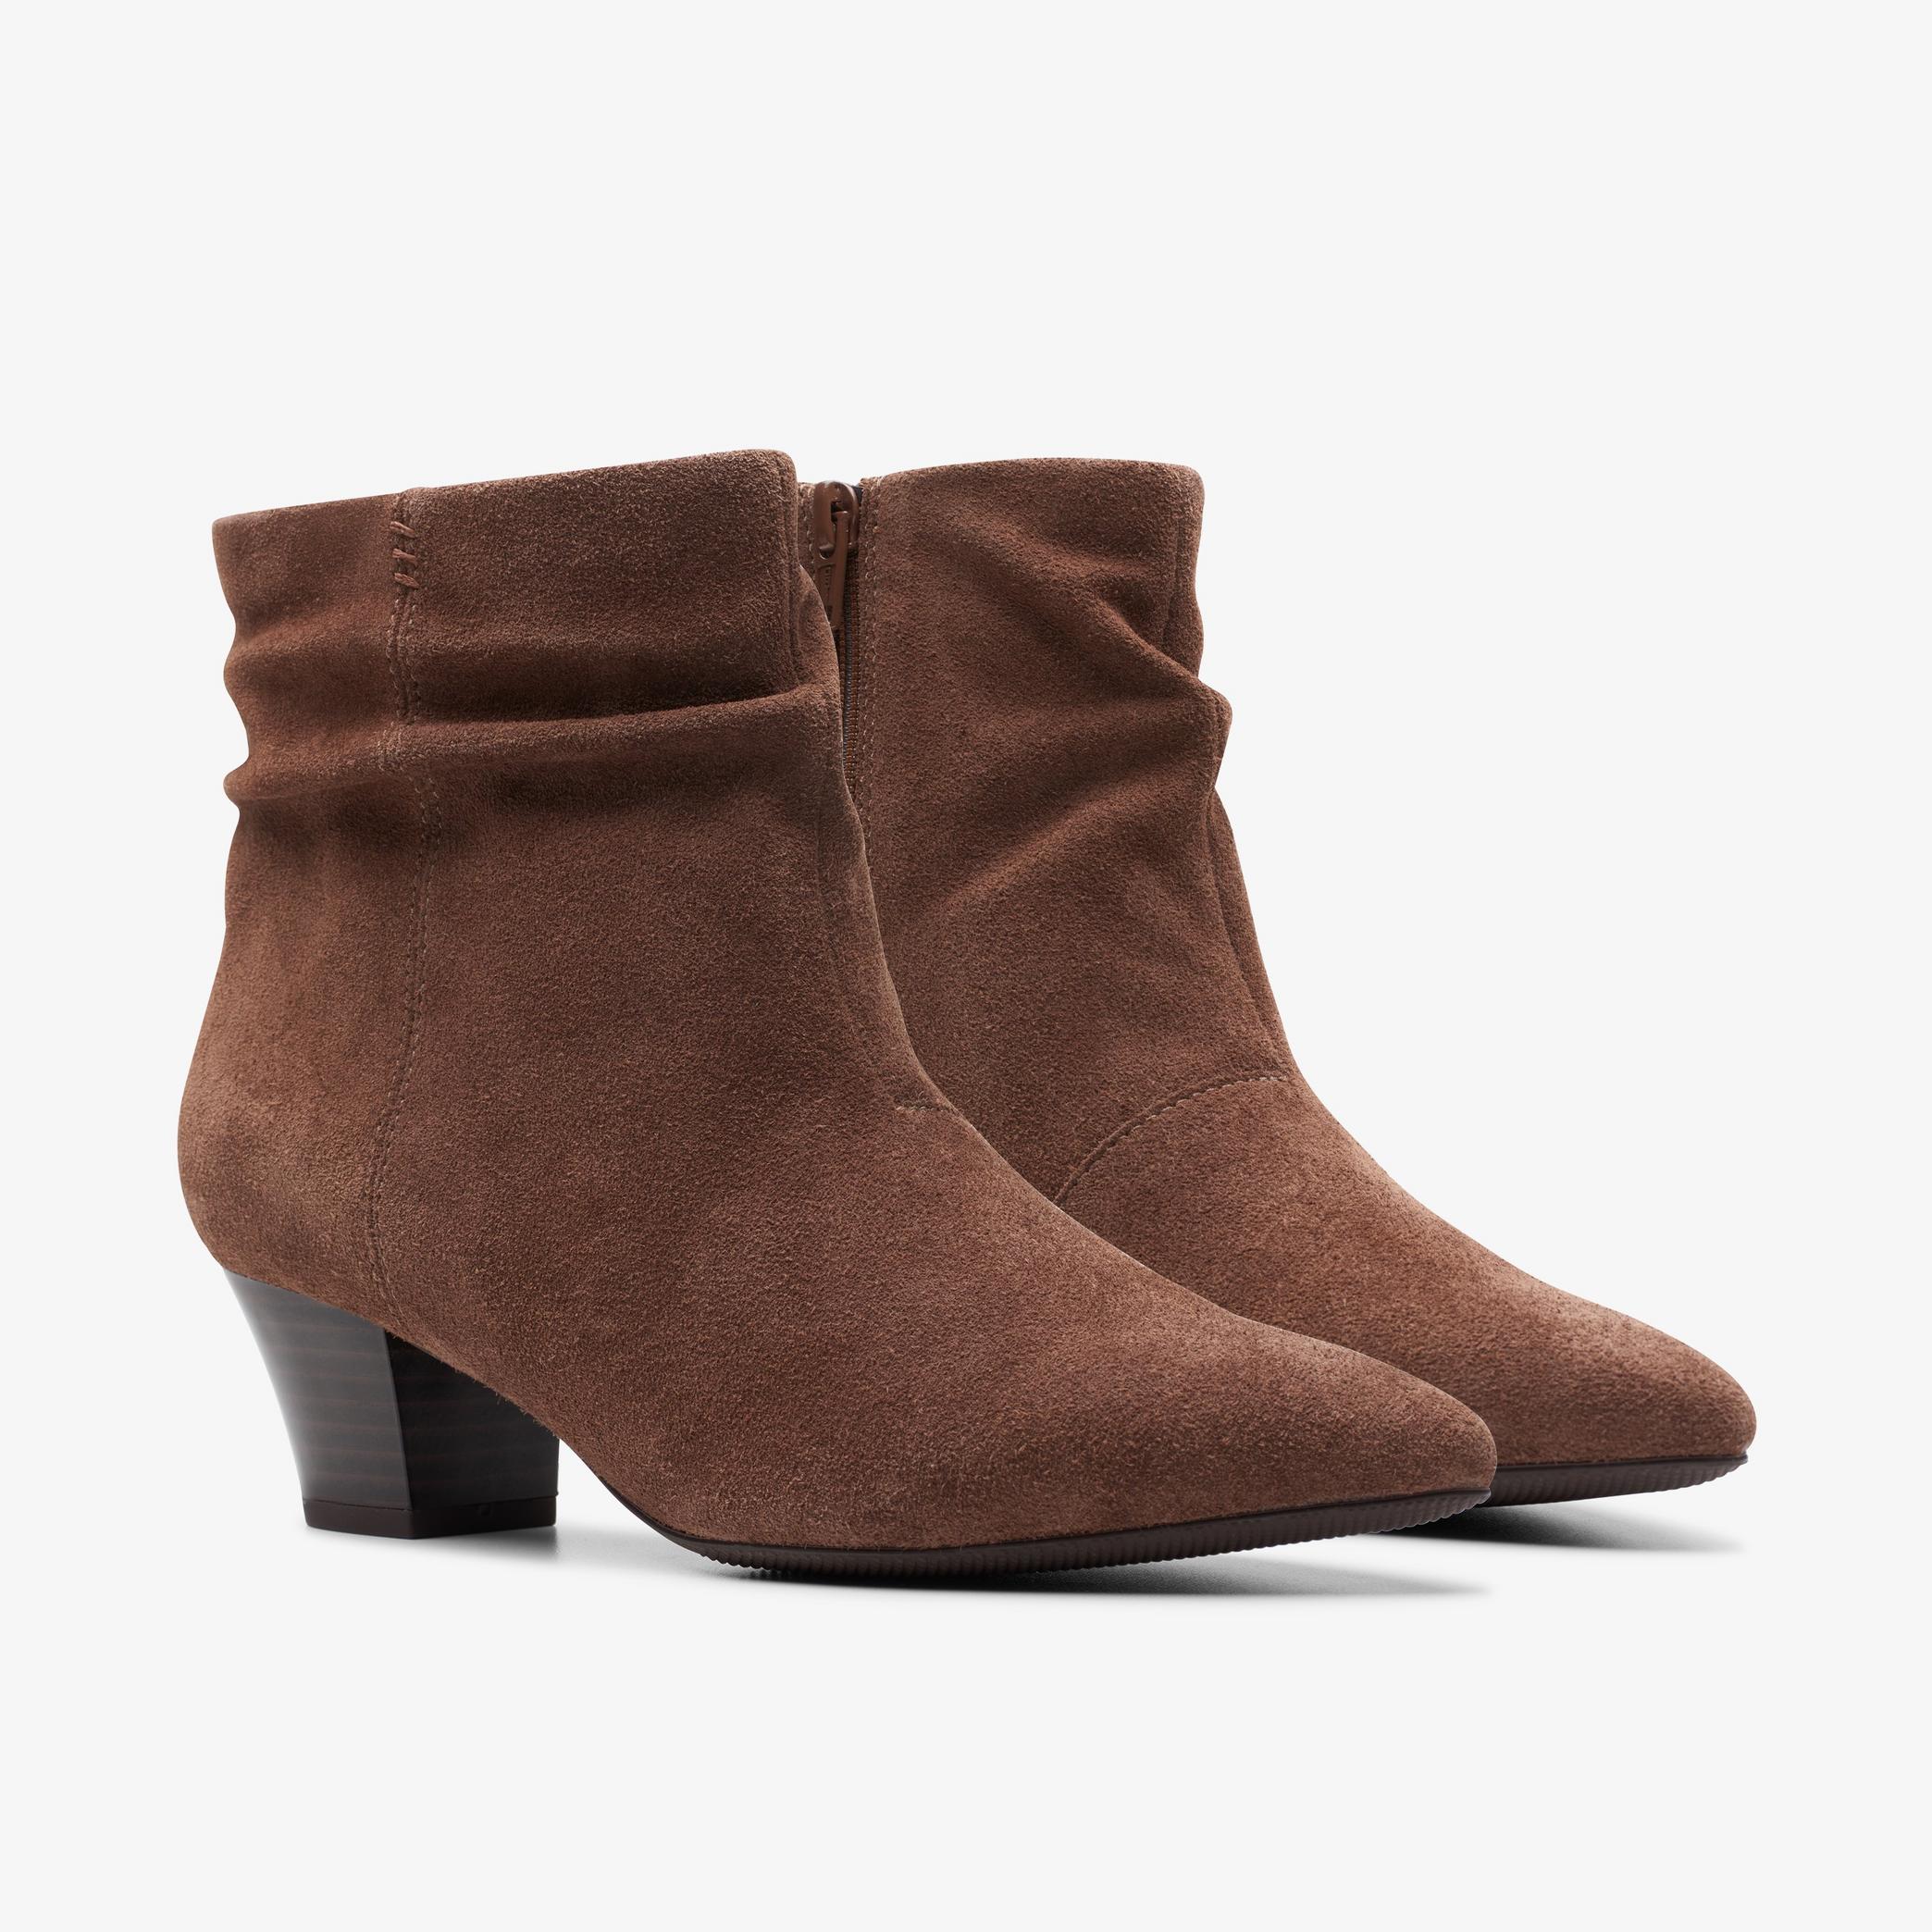 Teresa Skip Taupe Suede Ankle Boots, view 4 of 6